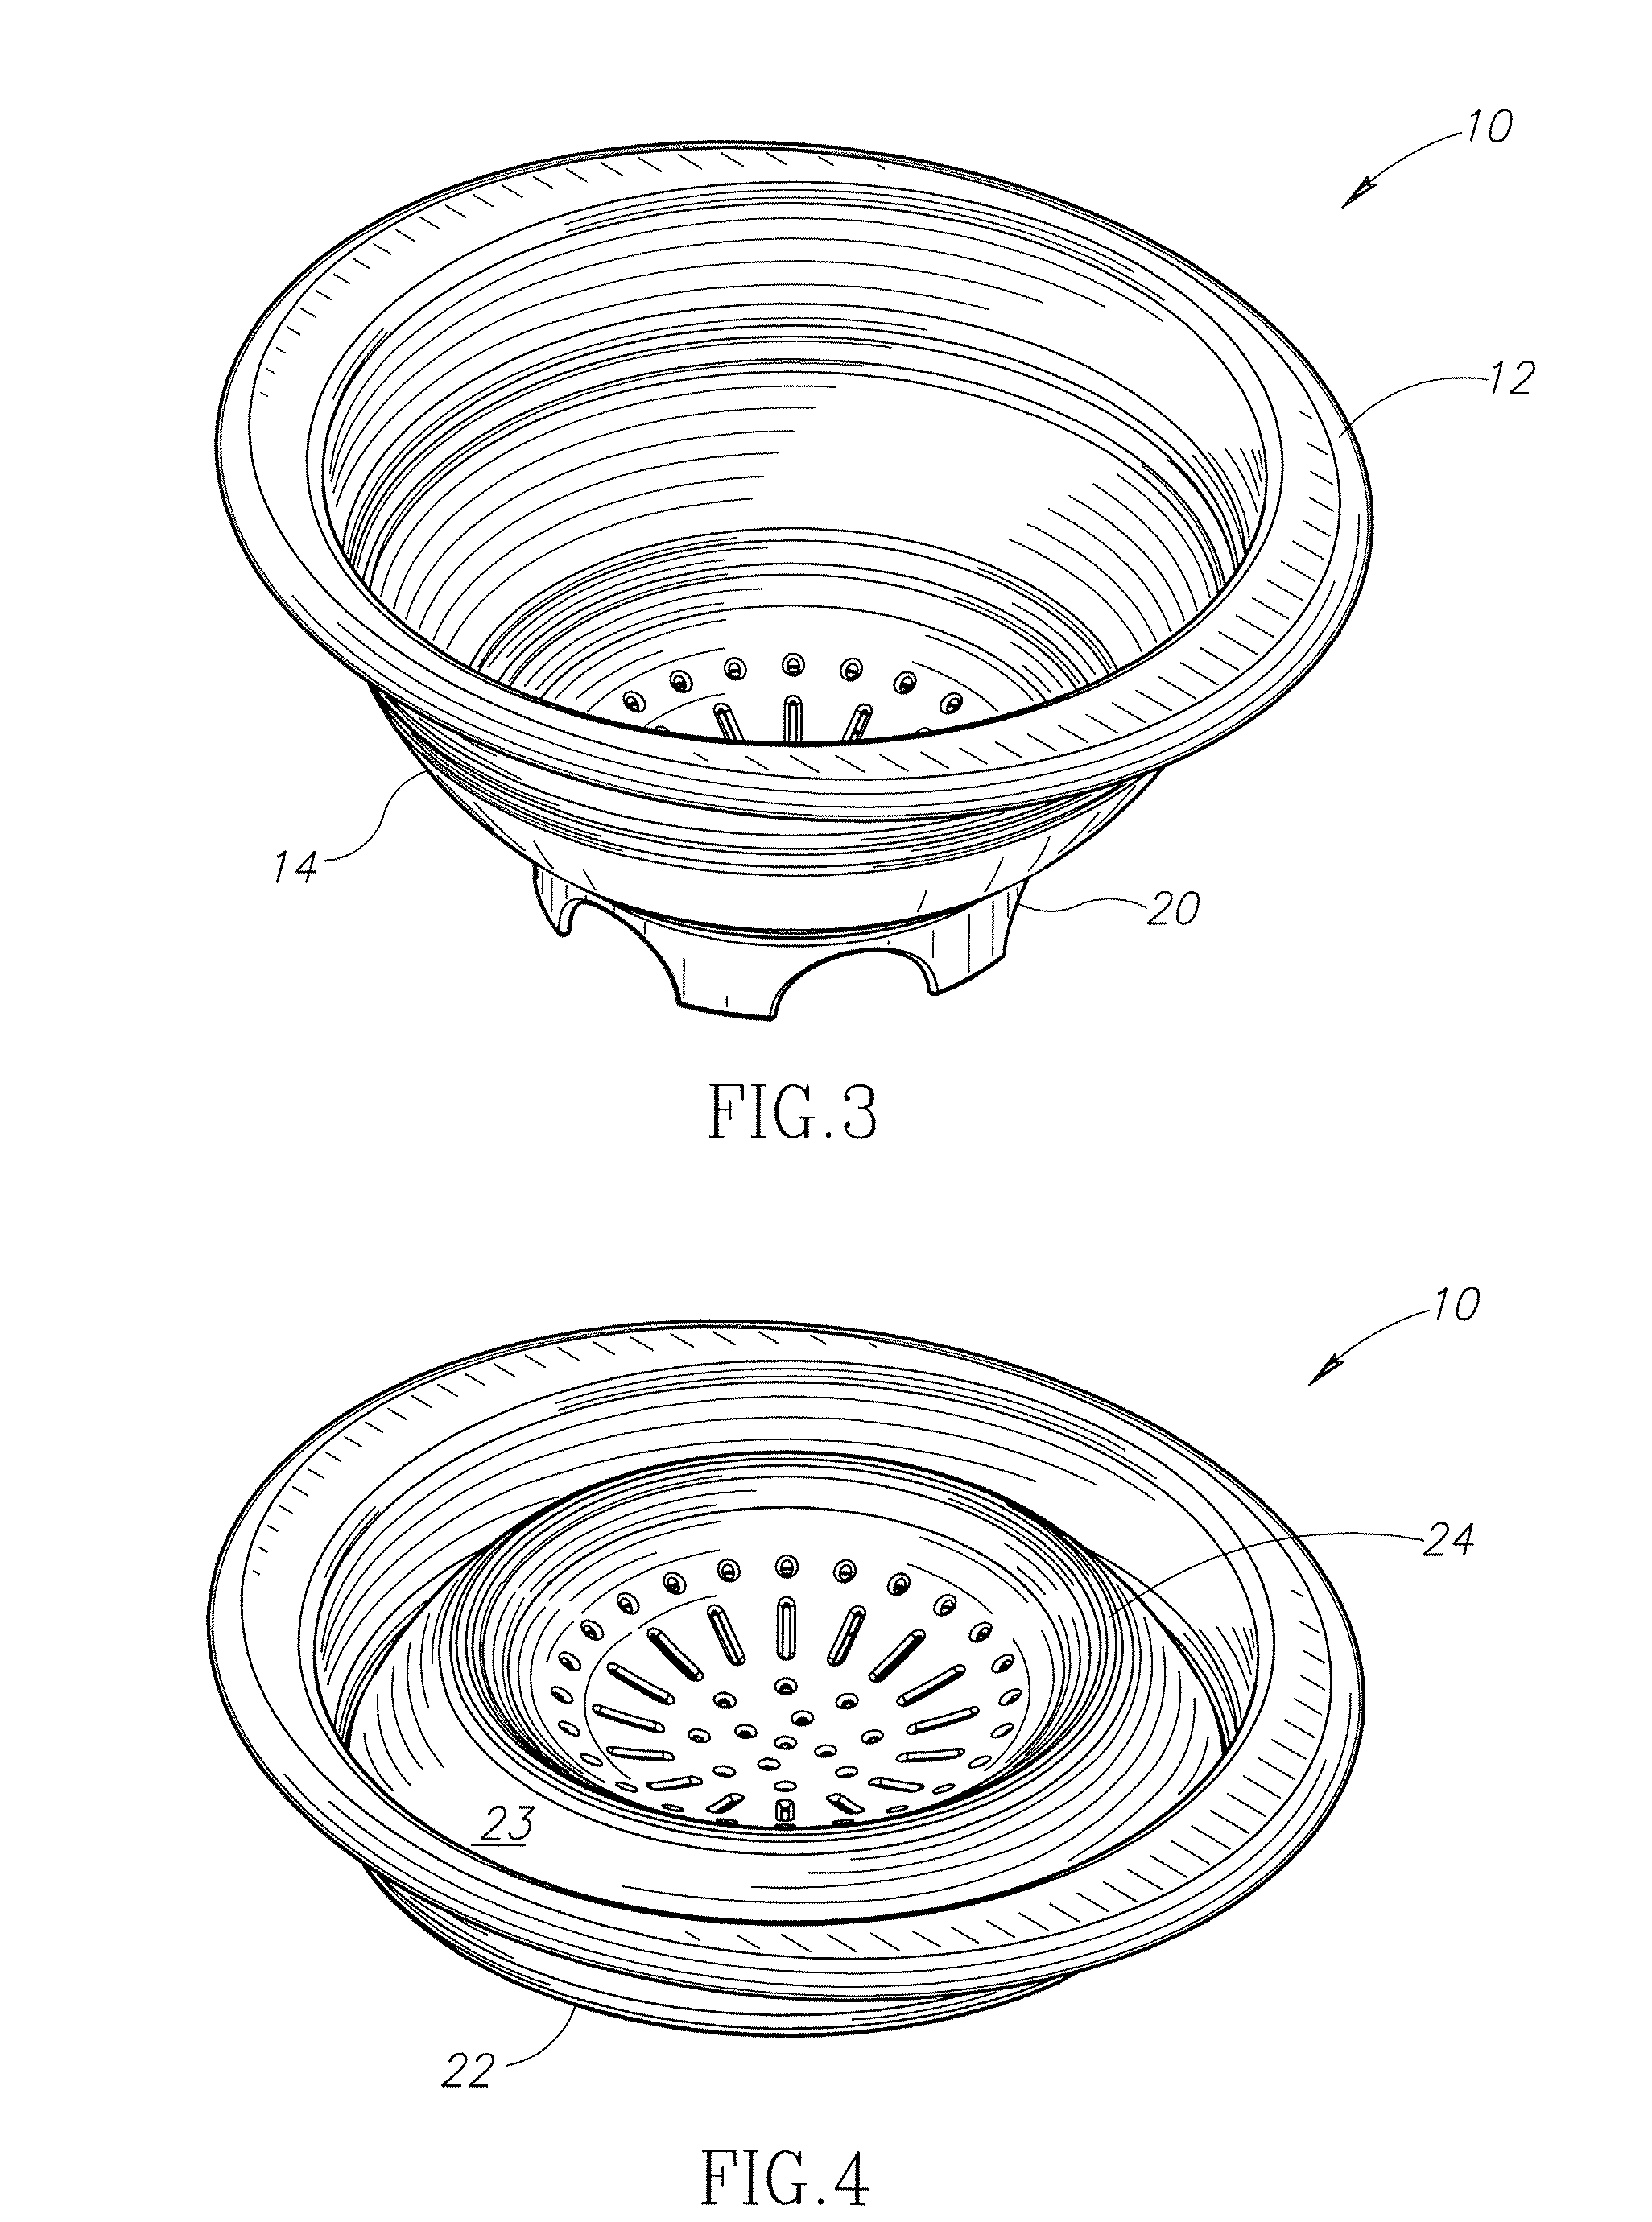 Collapsible colander and bowl